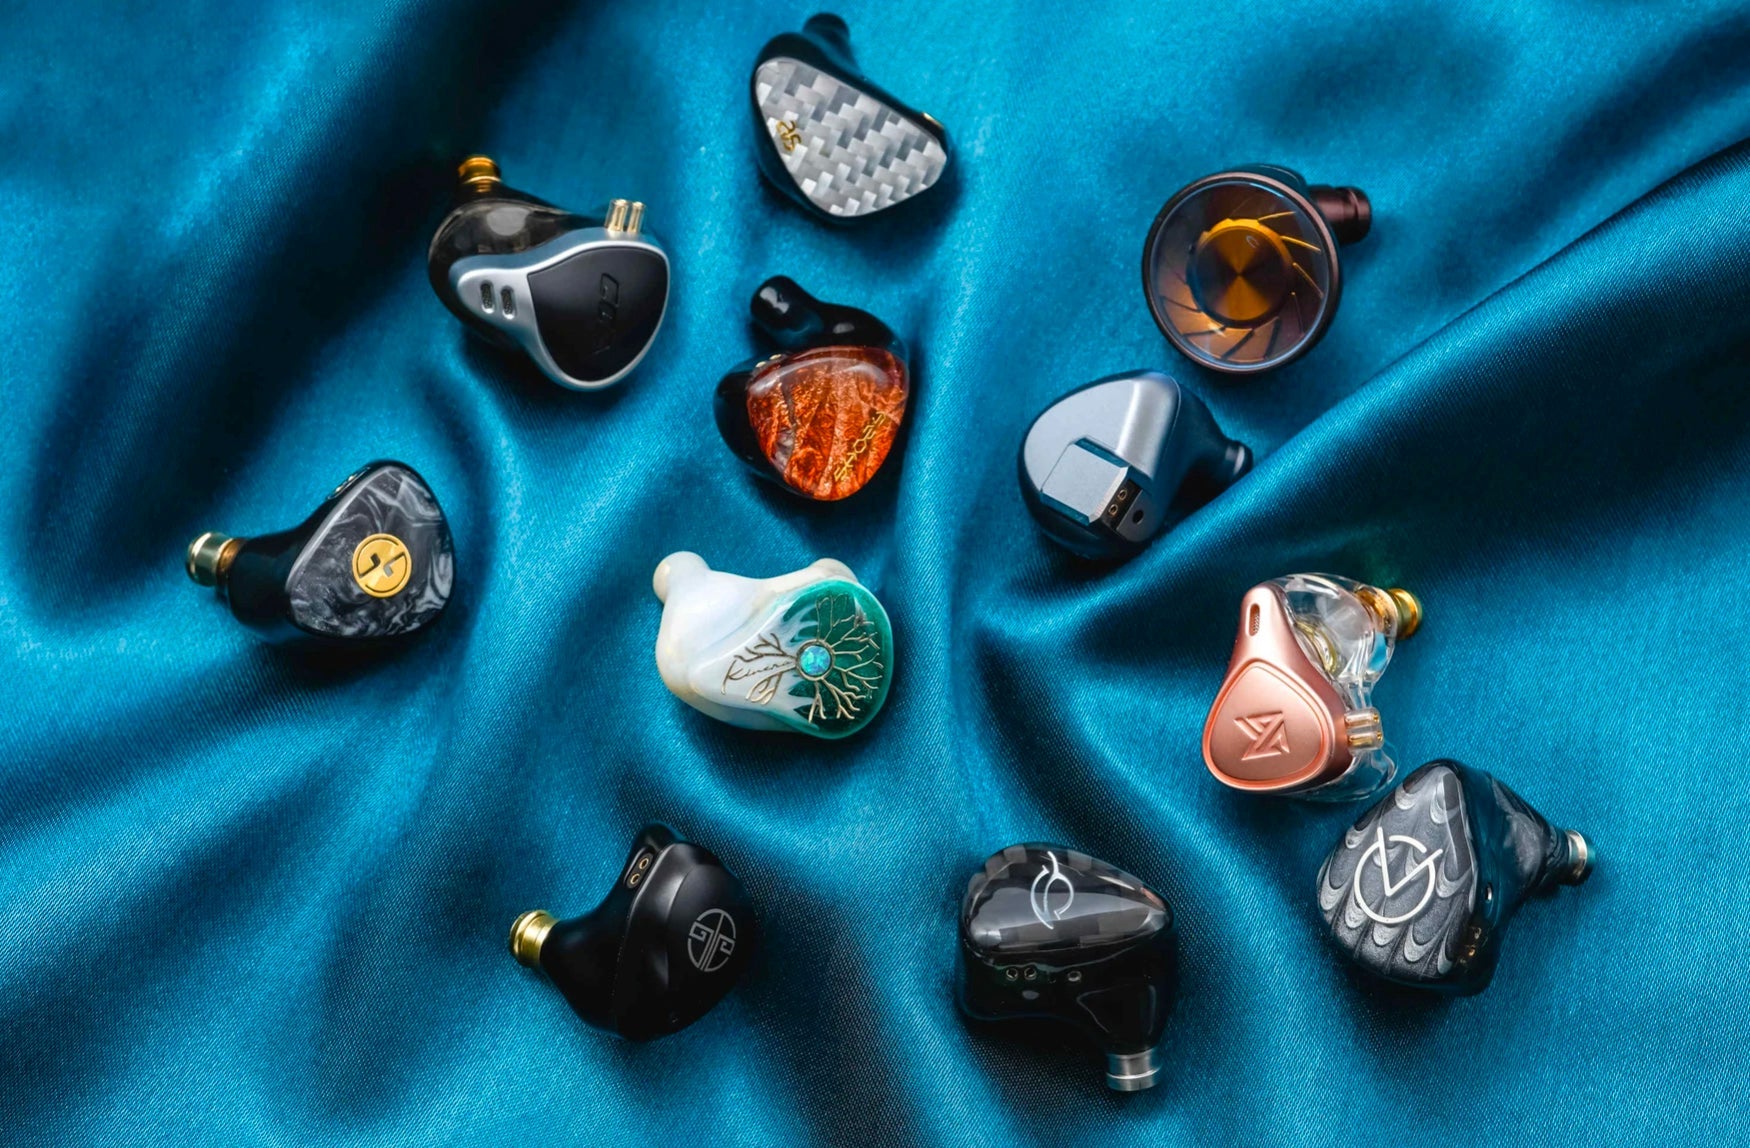 IEM Purchase Guide 2022: Your Personal Guide On Finding Your Perfect IEMs